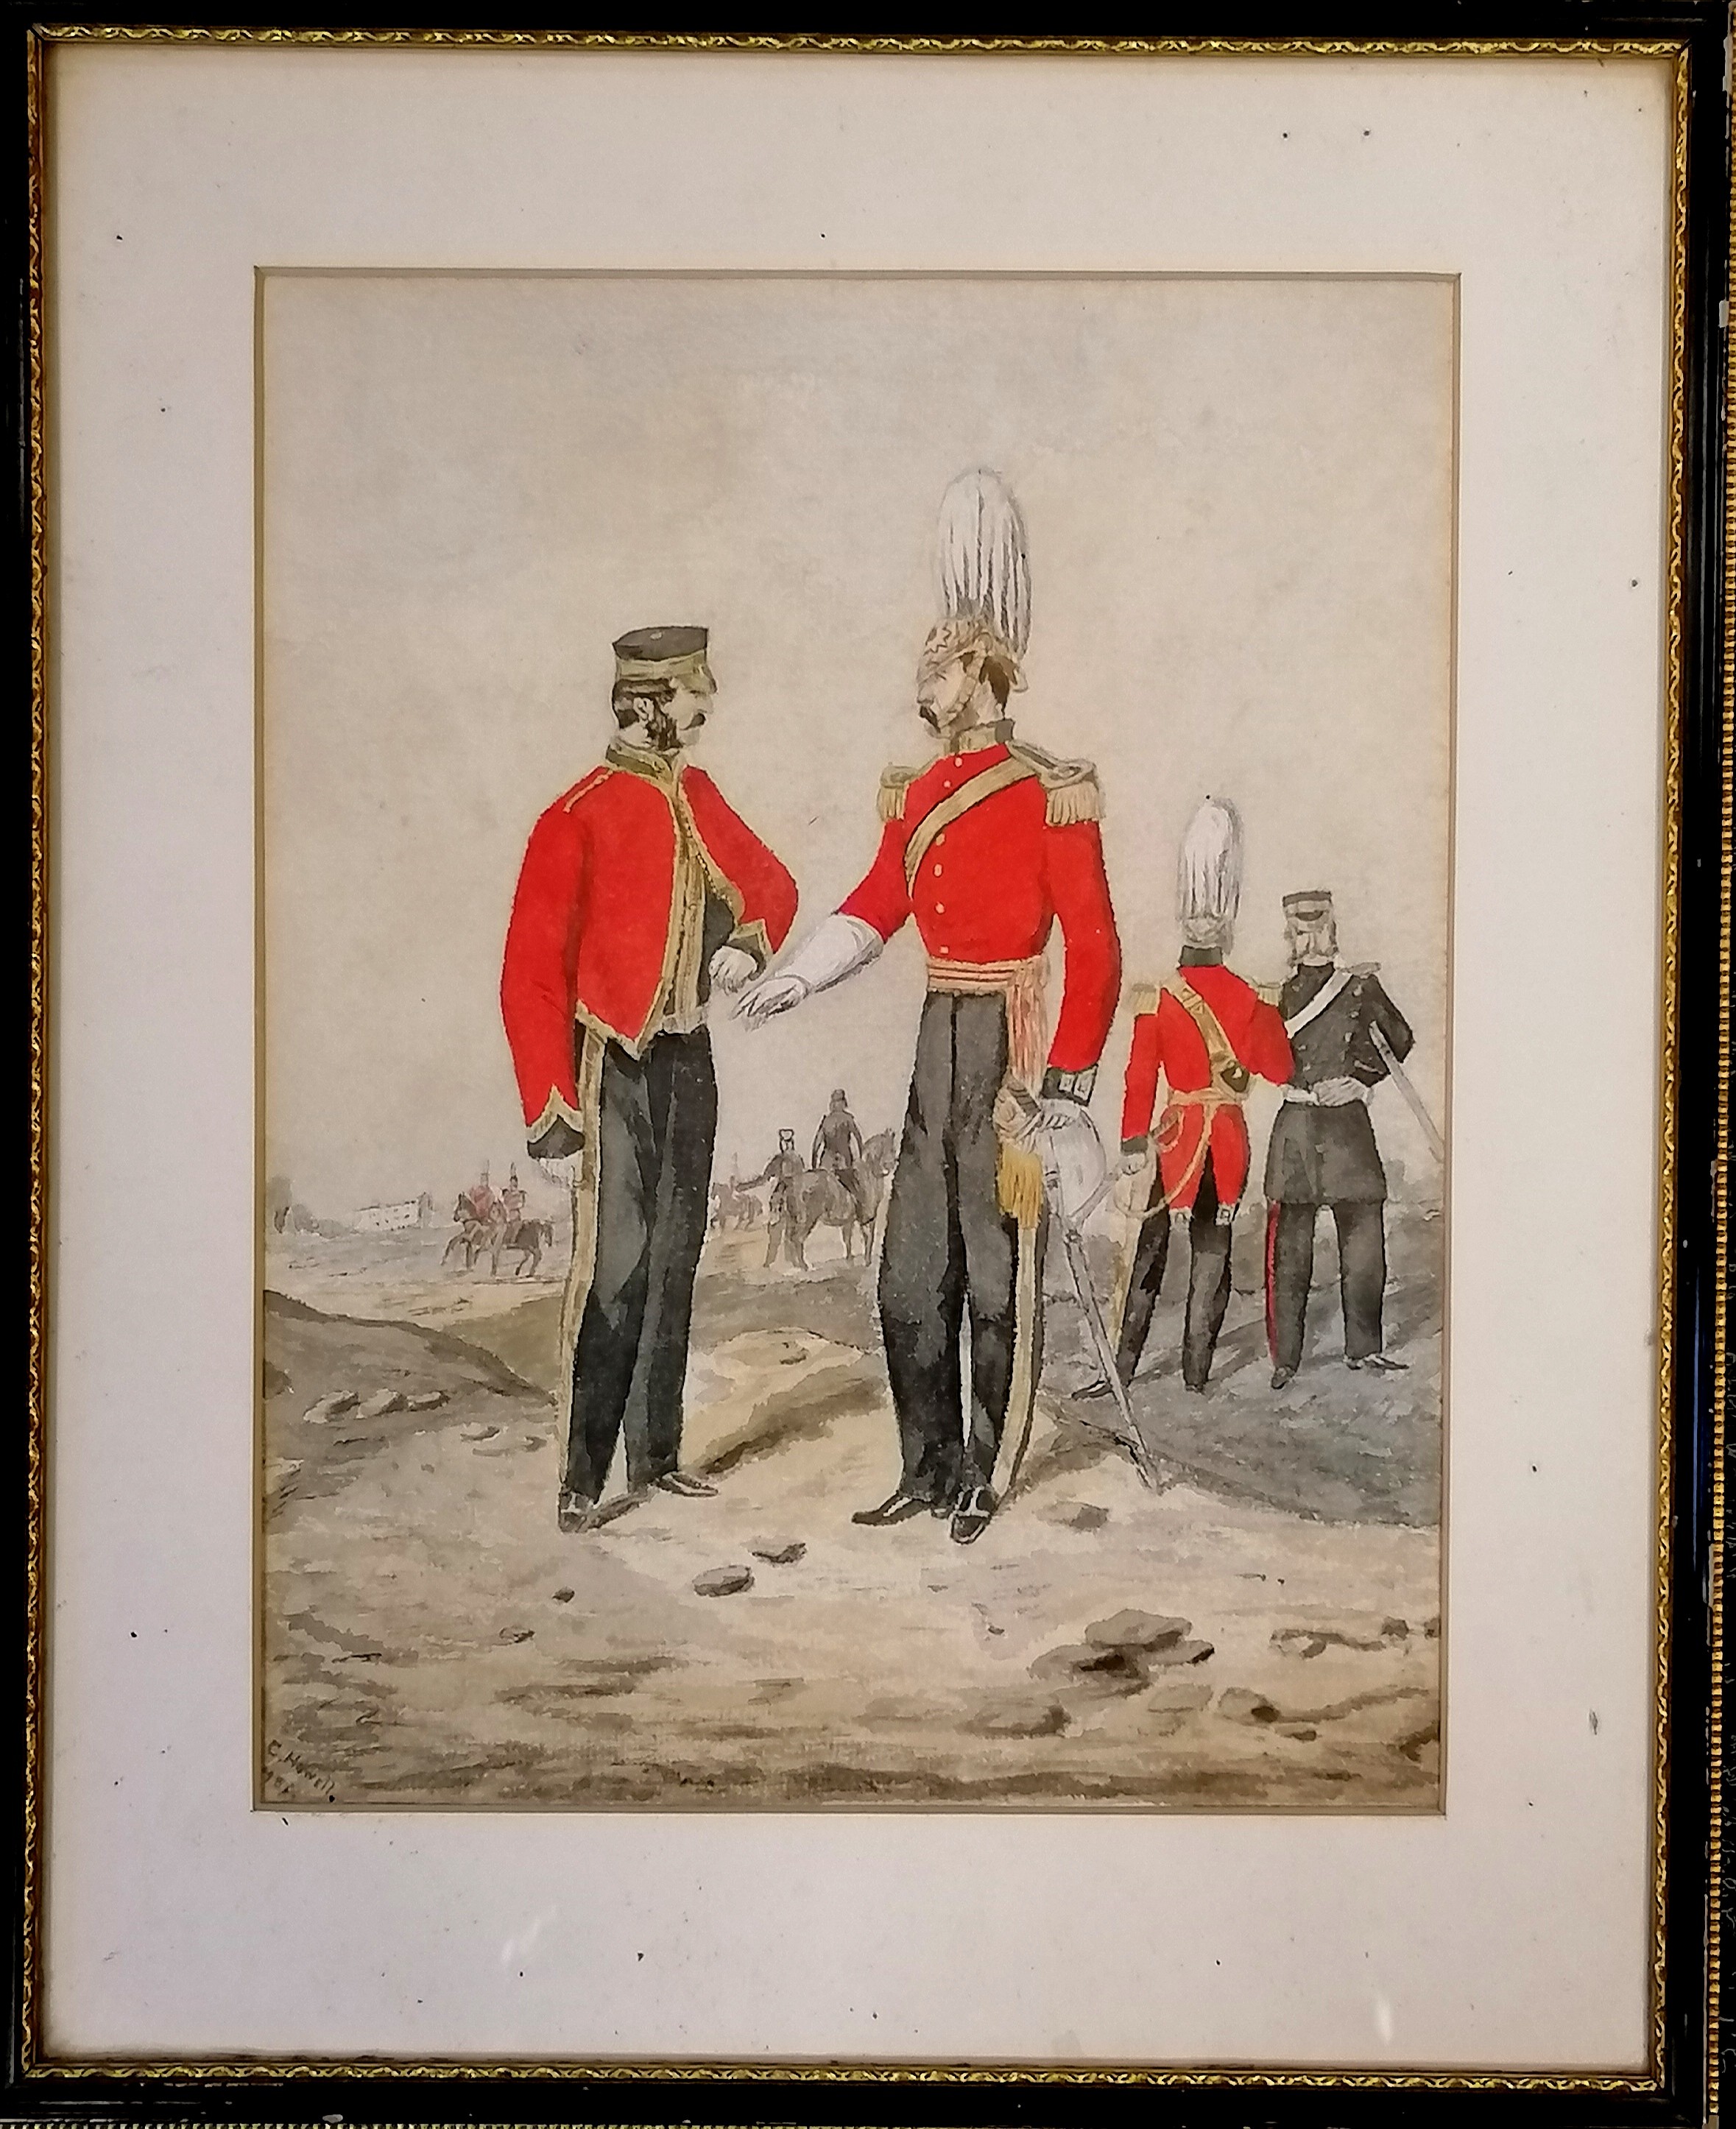 Watercolour painting of some military men signed C Howell - frame 40cm x 33cm - Image 4 of 4